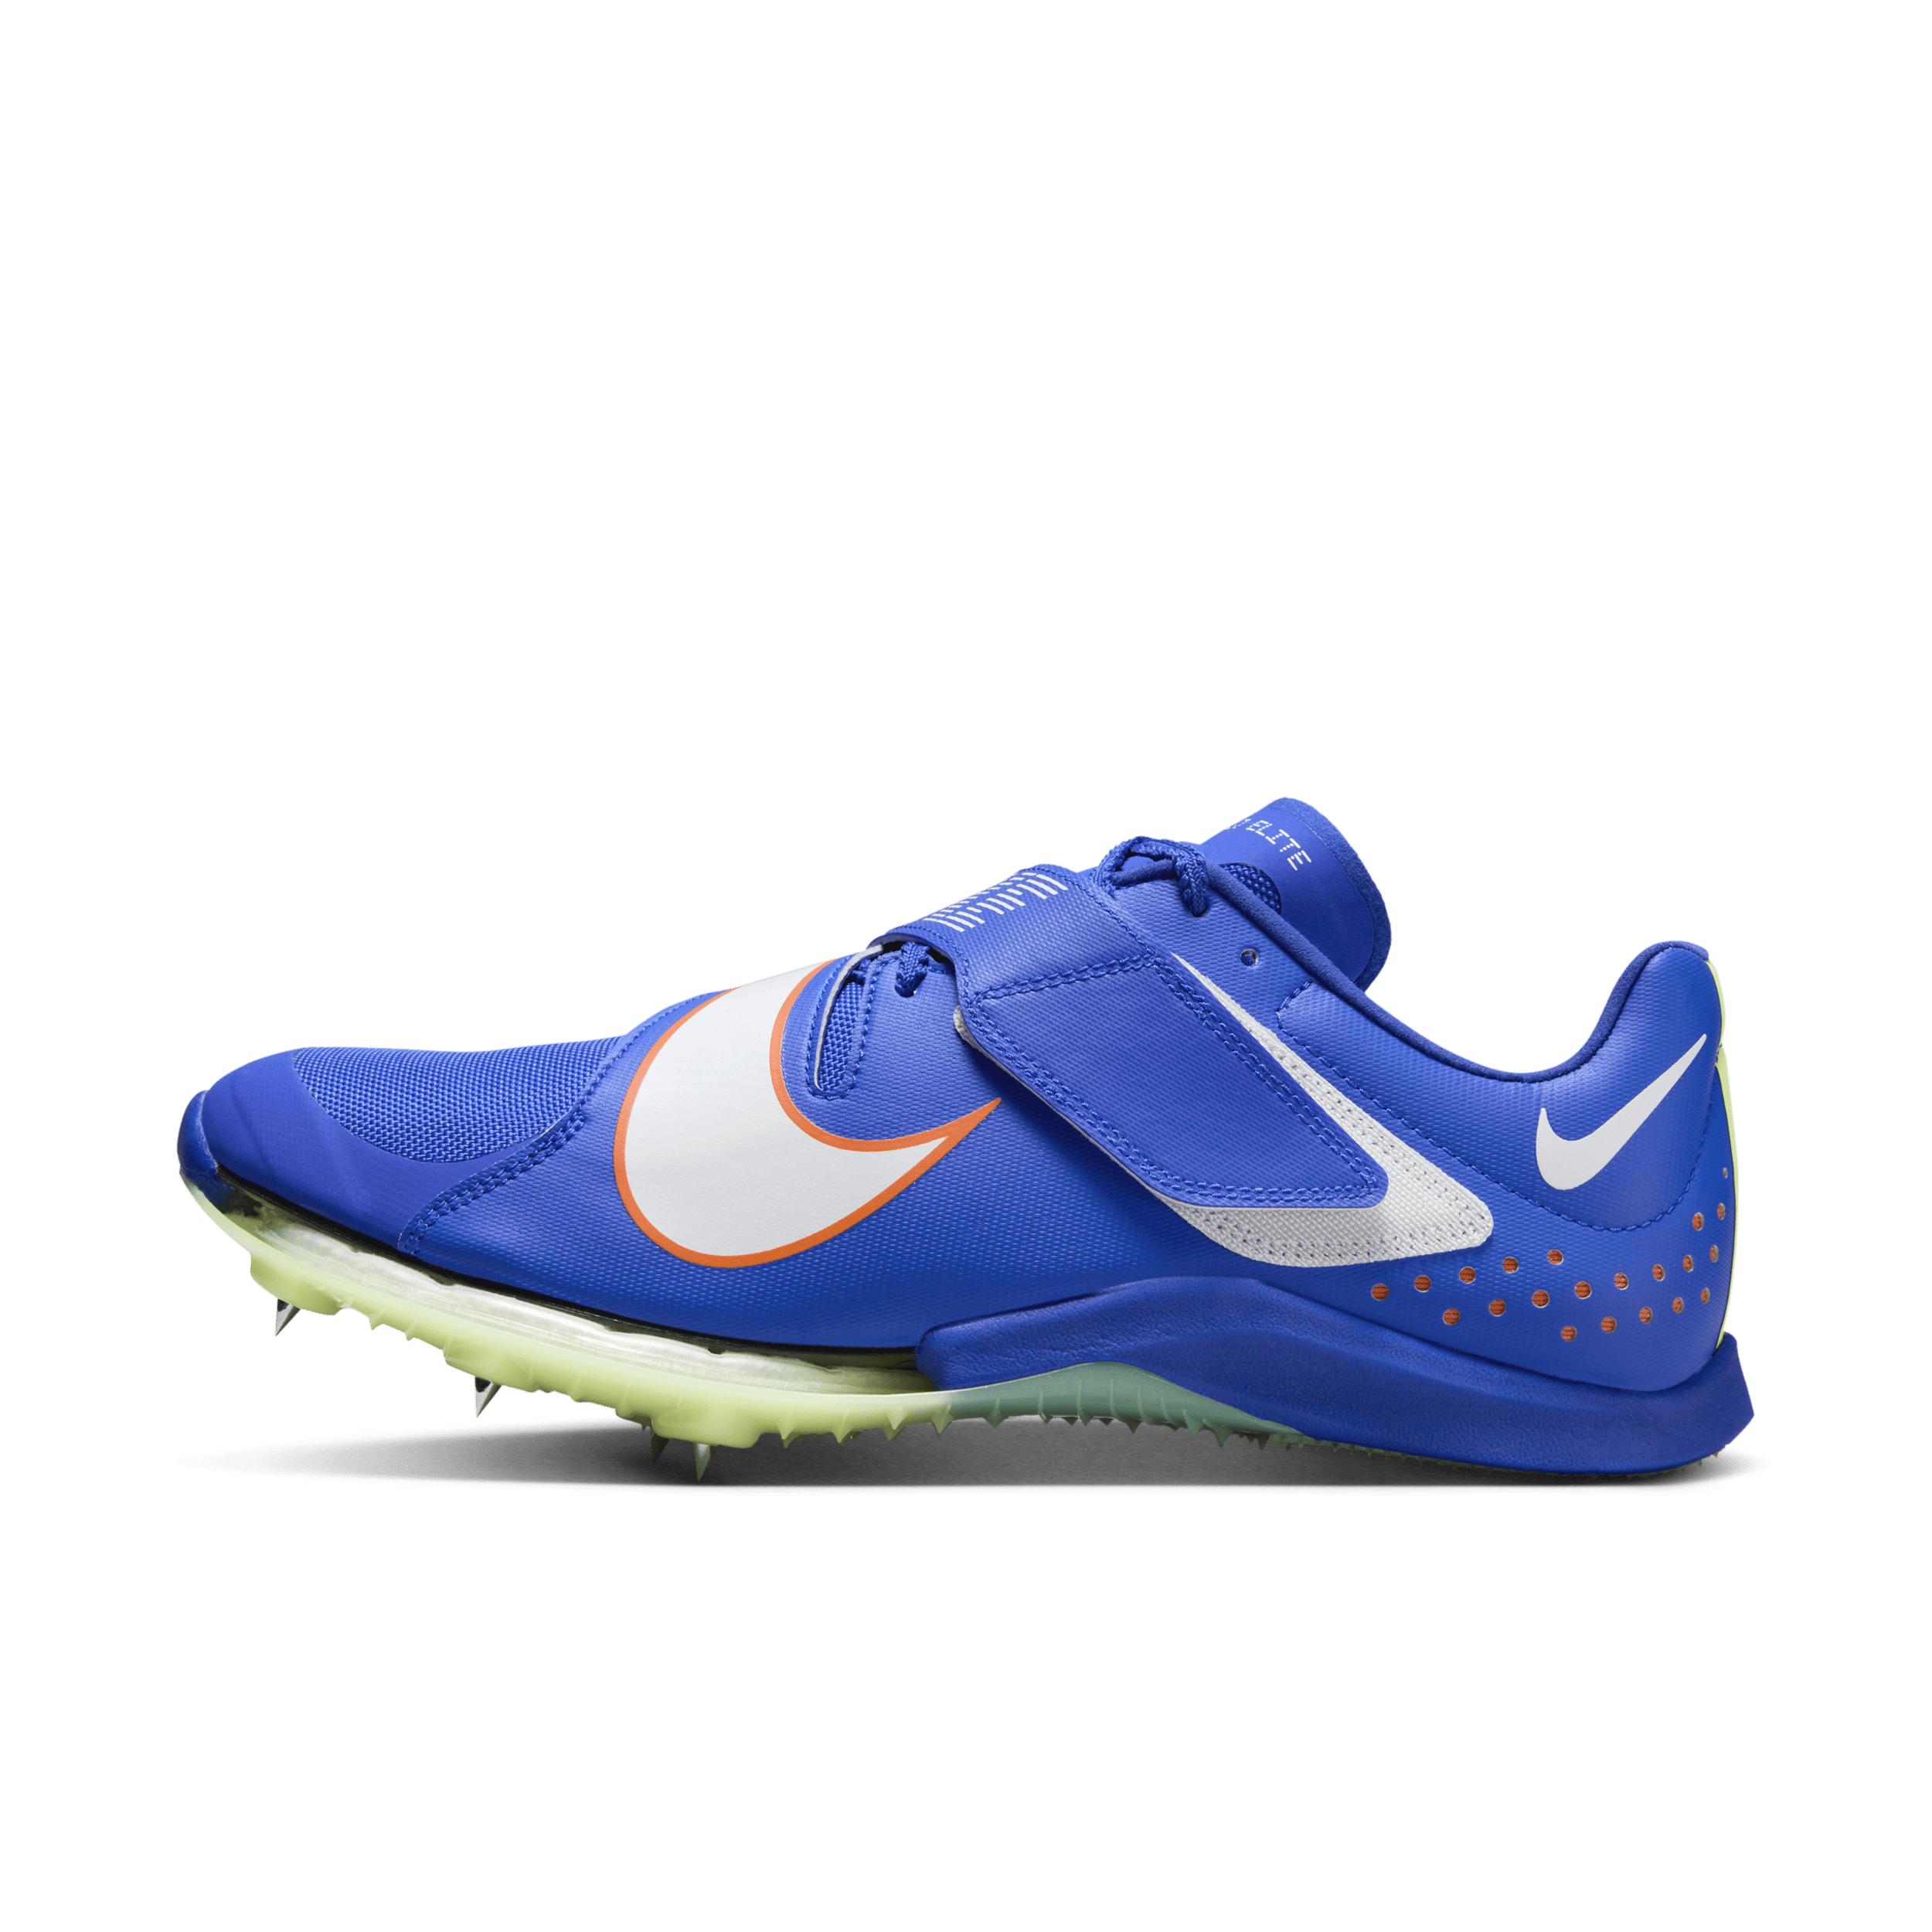 Nike Air Zoom LJ Elite Track and Field jumping spikes - Blauw